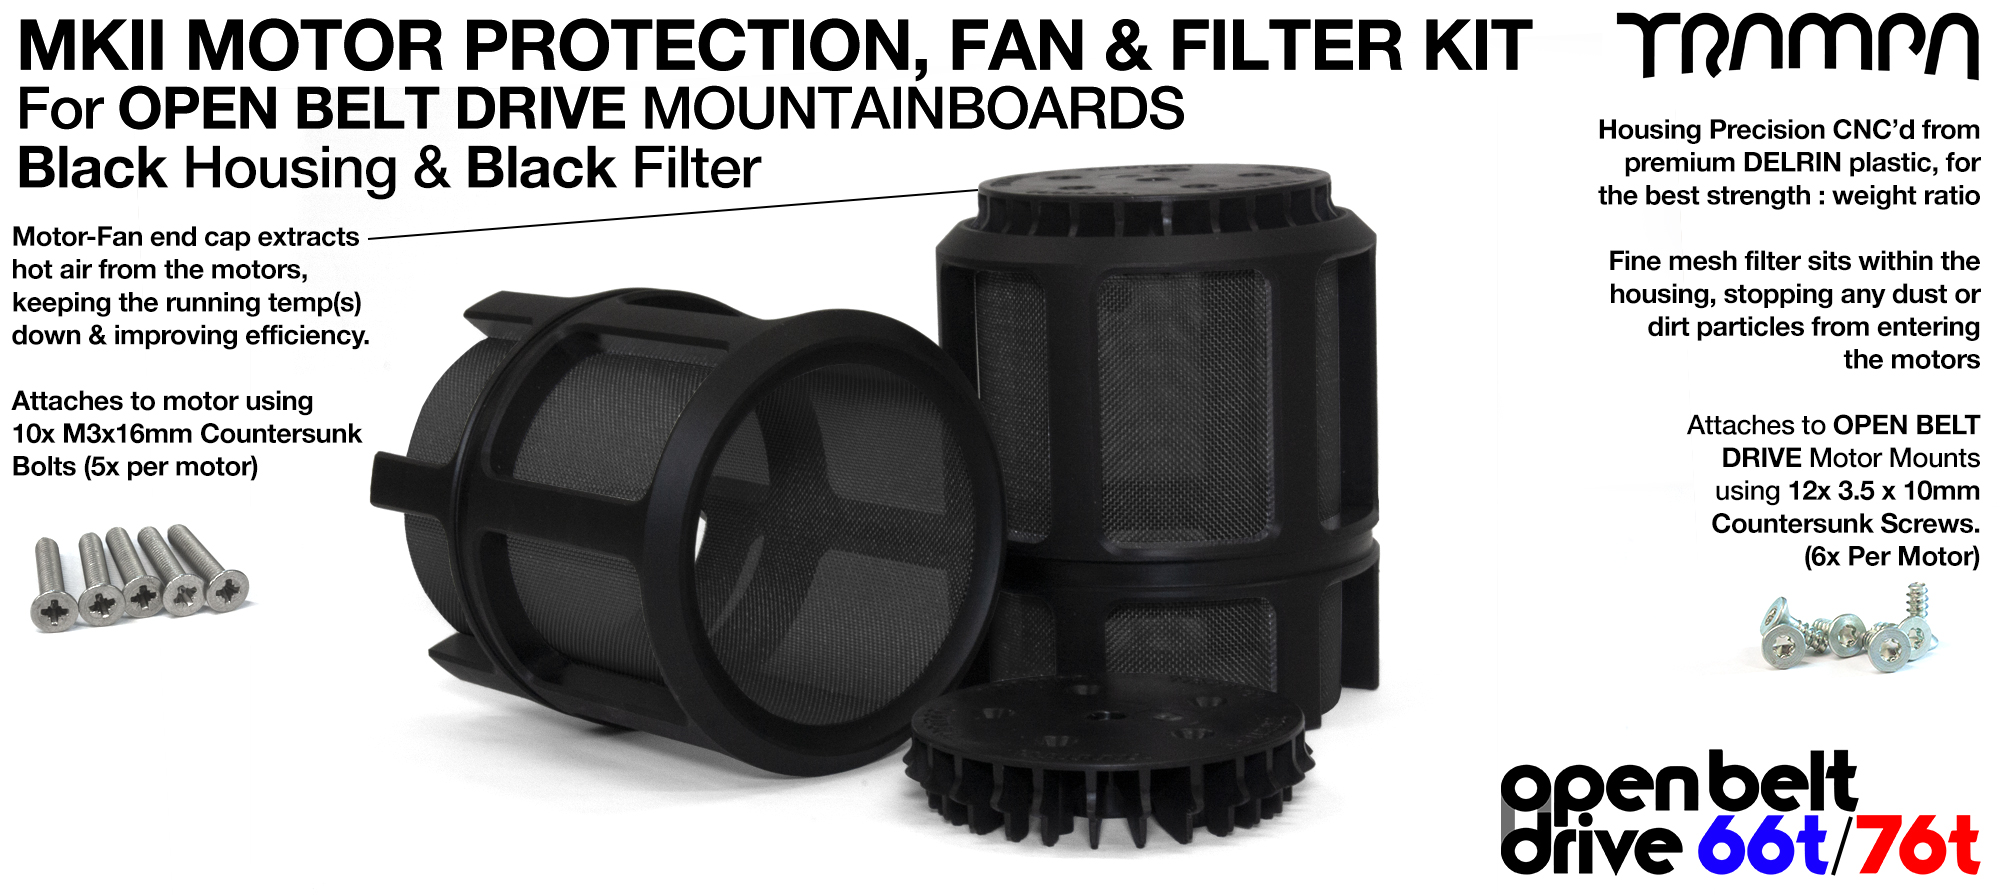 FULL CAGE Motor protection SUPER STRONG DELRIN Plastic includes Fan & BLACKE Filter - TWIN